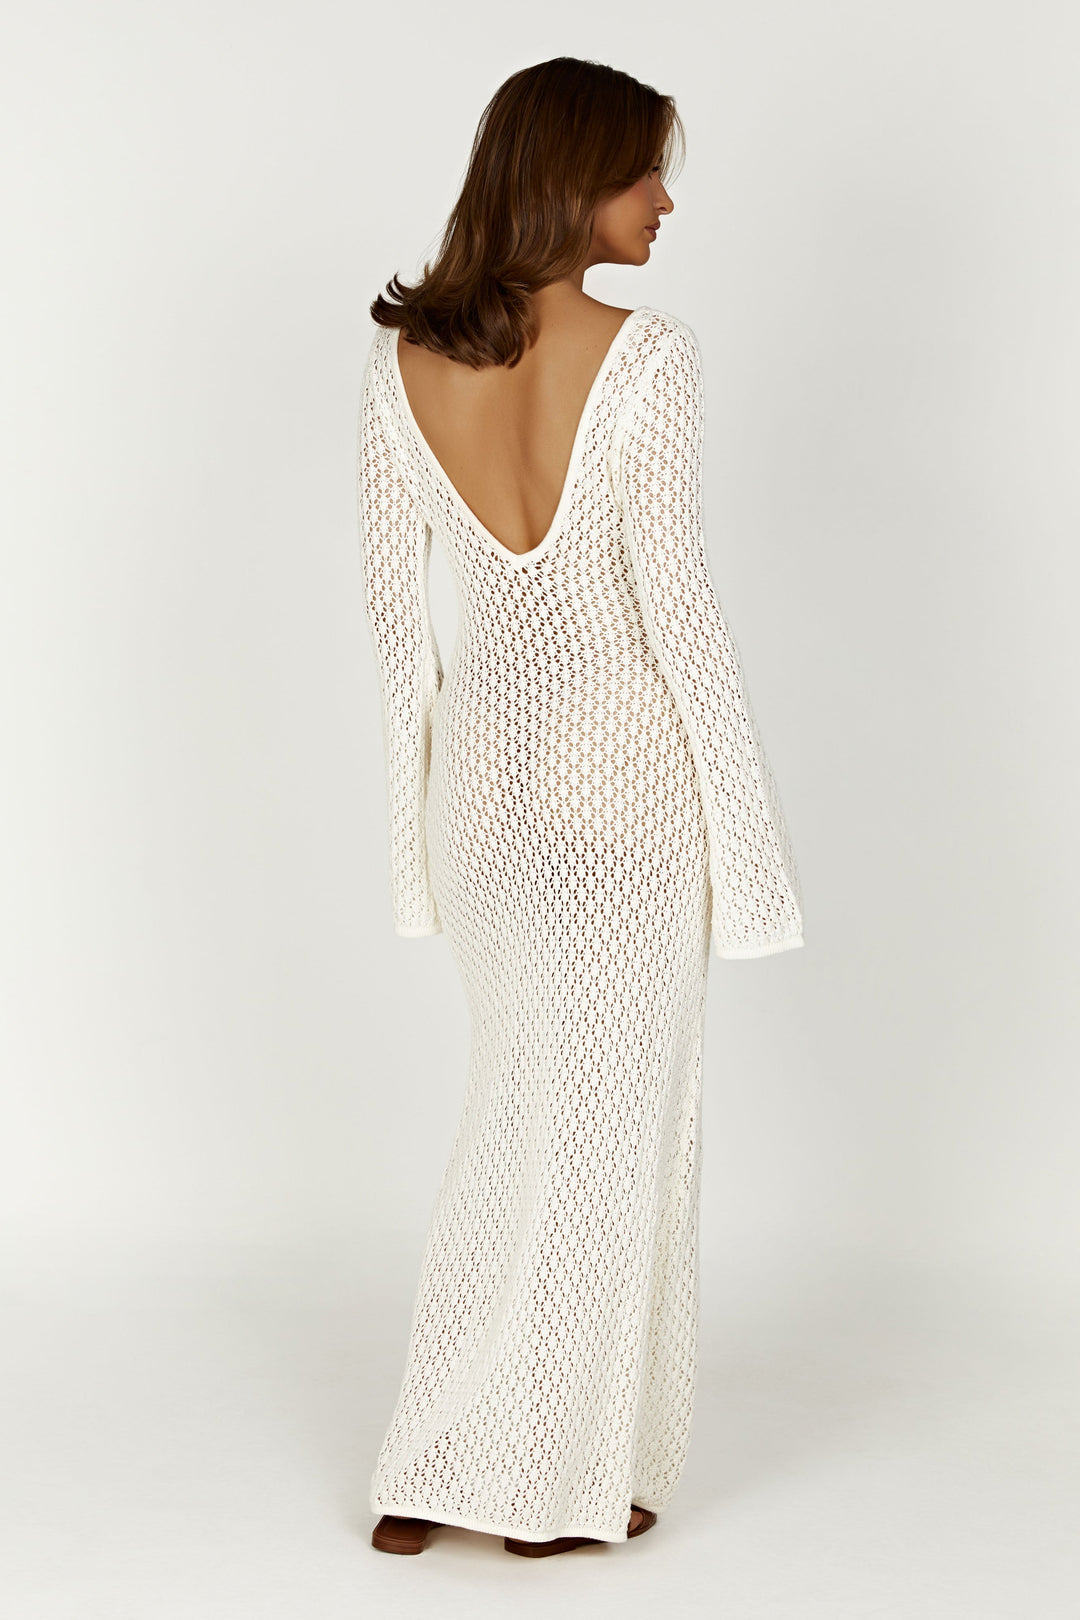 MELISSA™ |  KNITTED  COVER UP DRESS